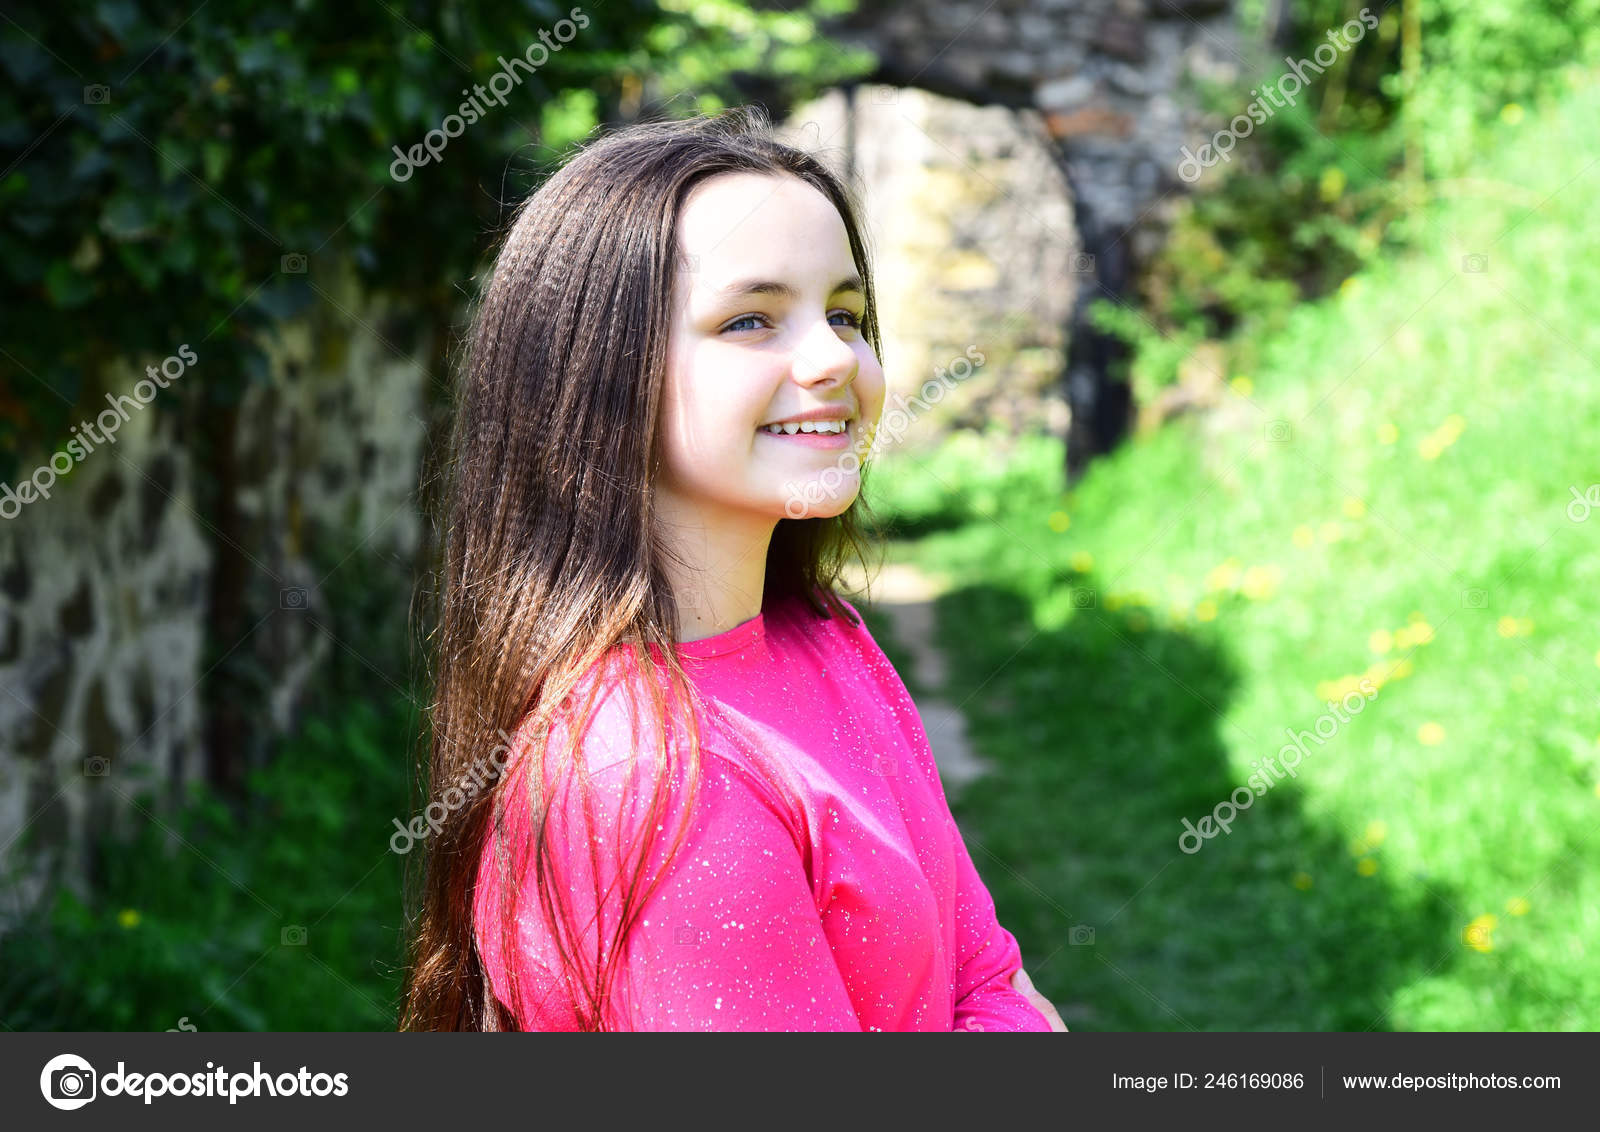 Kids Hair Style Stock Photos, Images and Backgrounds for Free Download